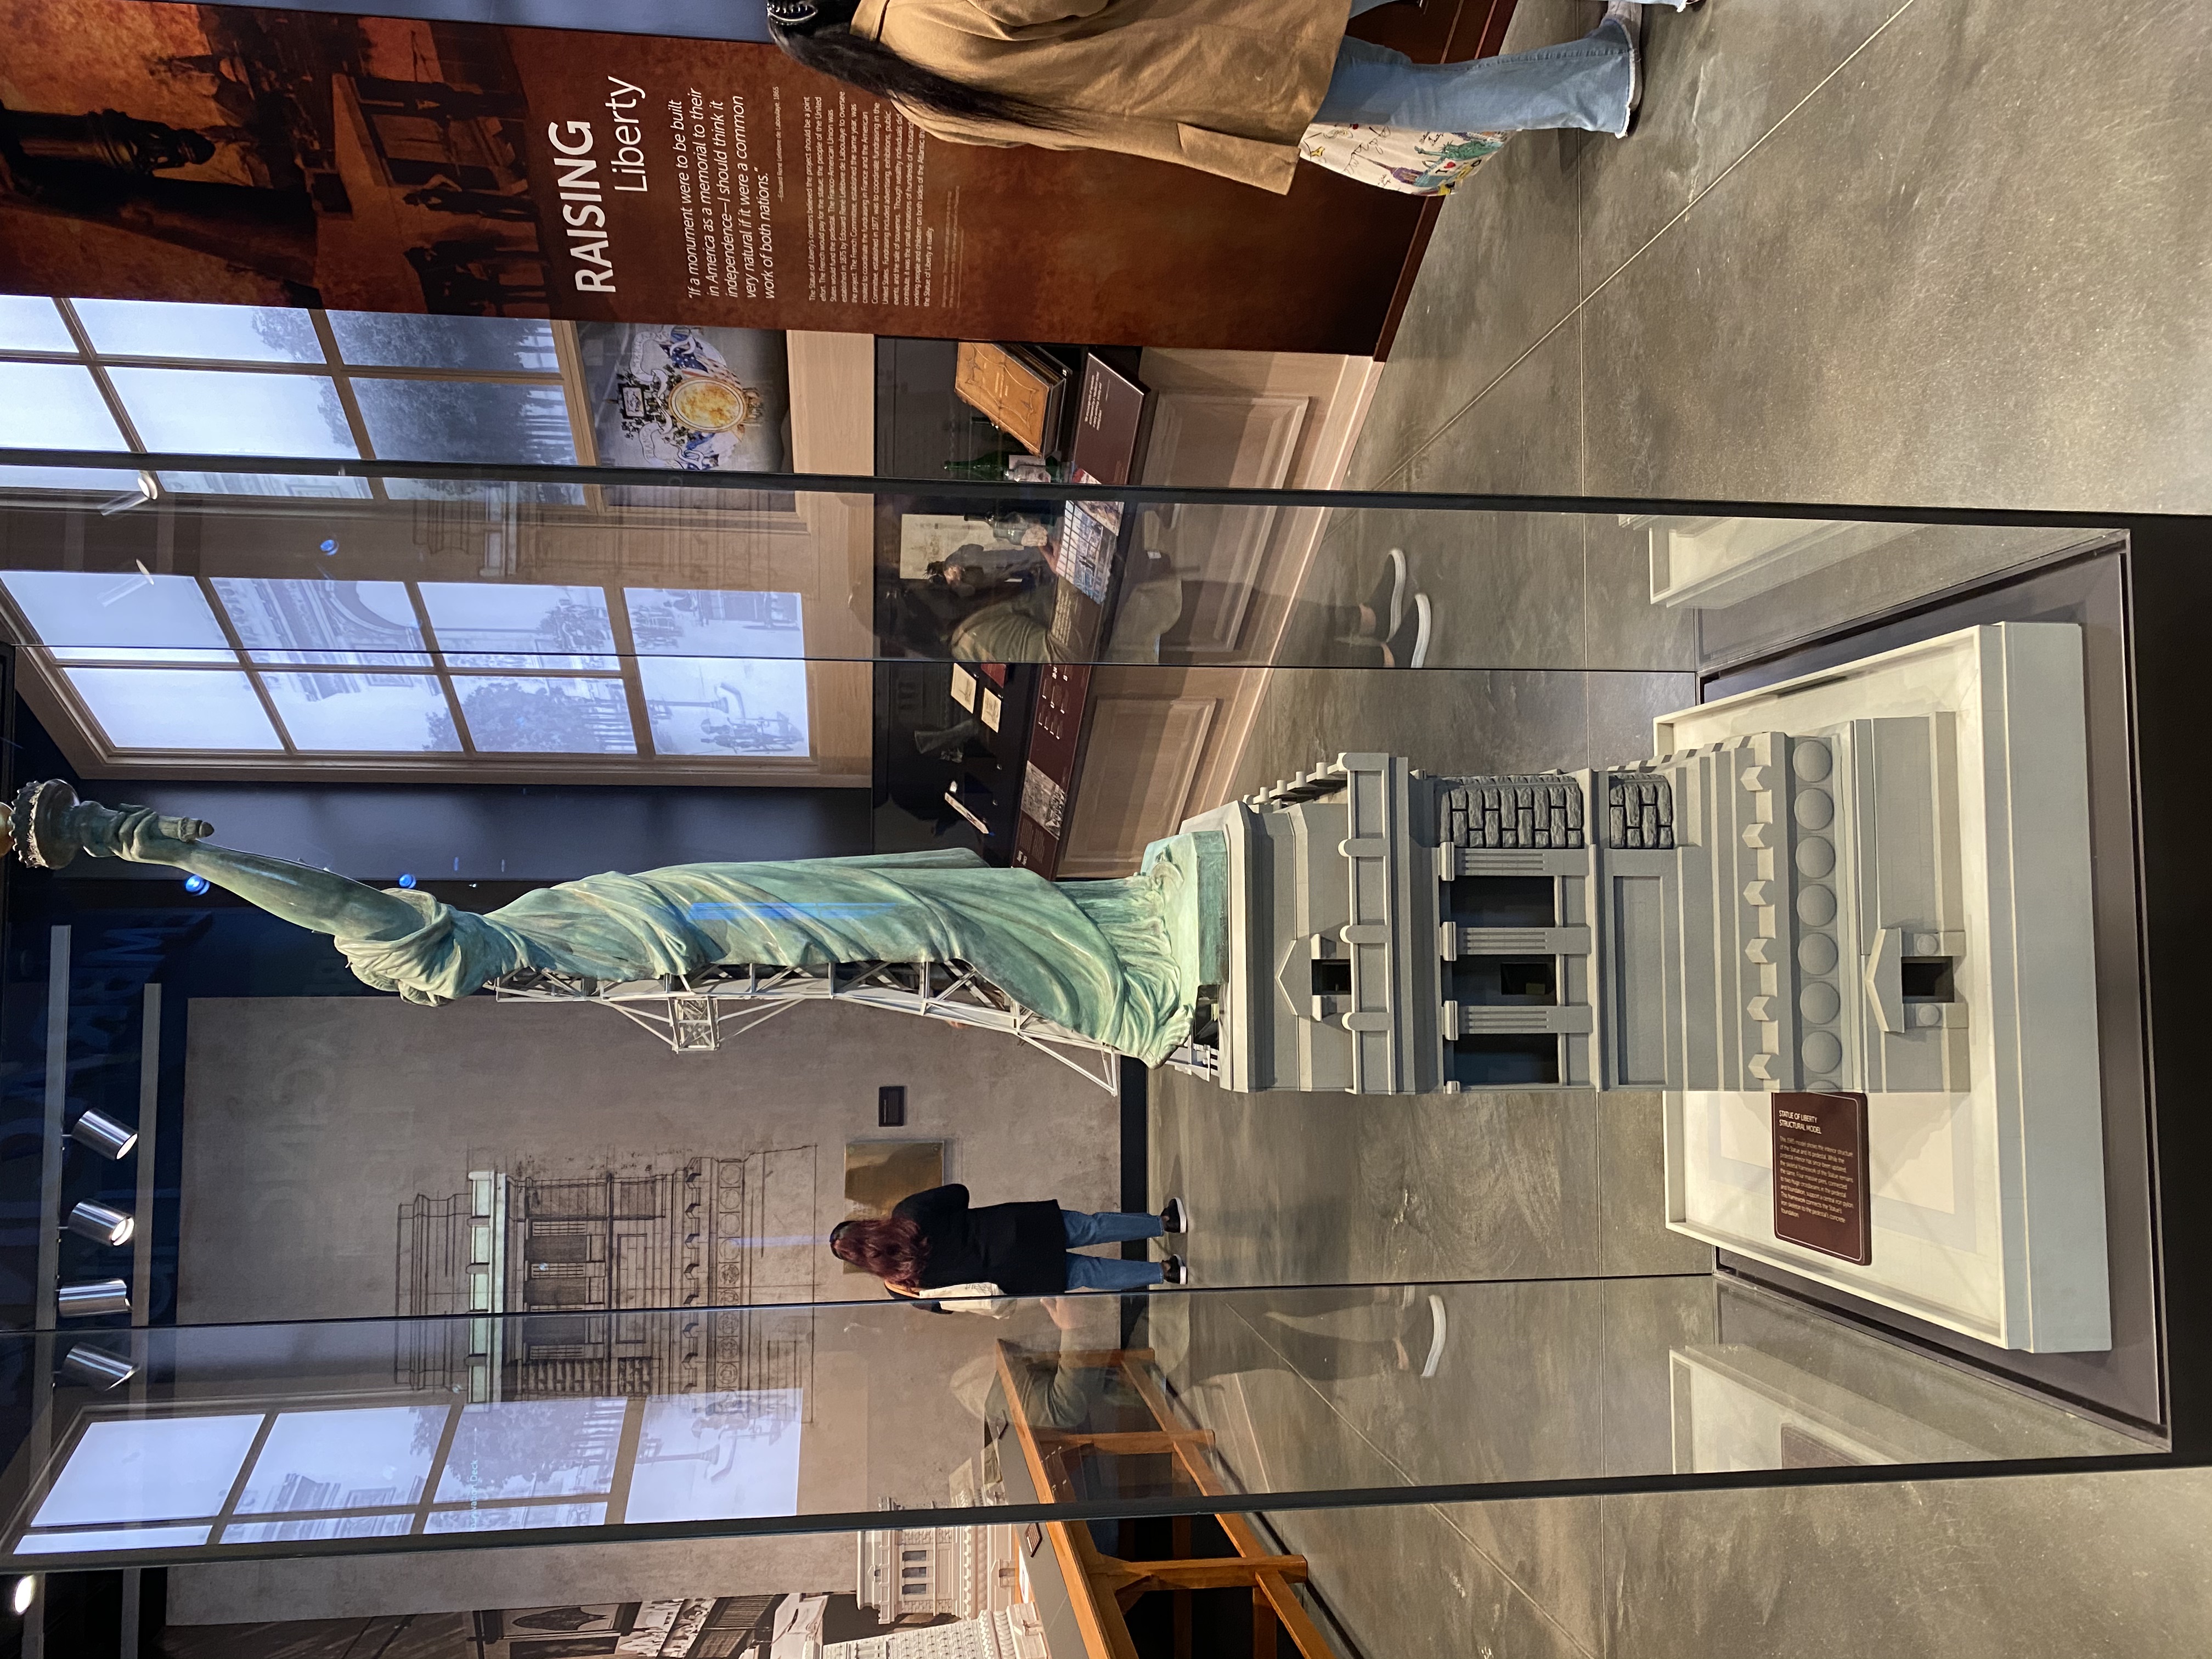 The Statue of Liberty Museum